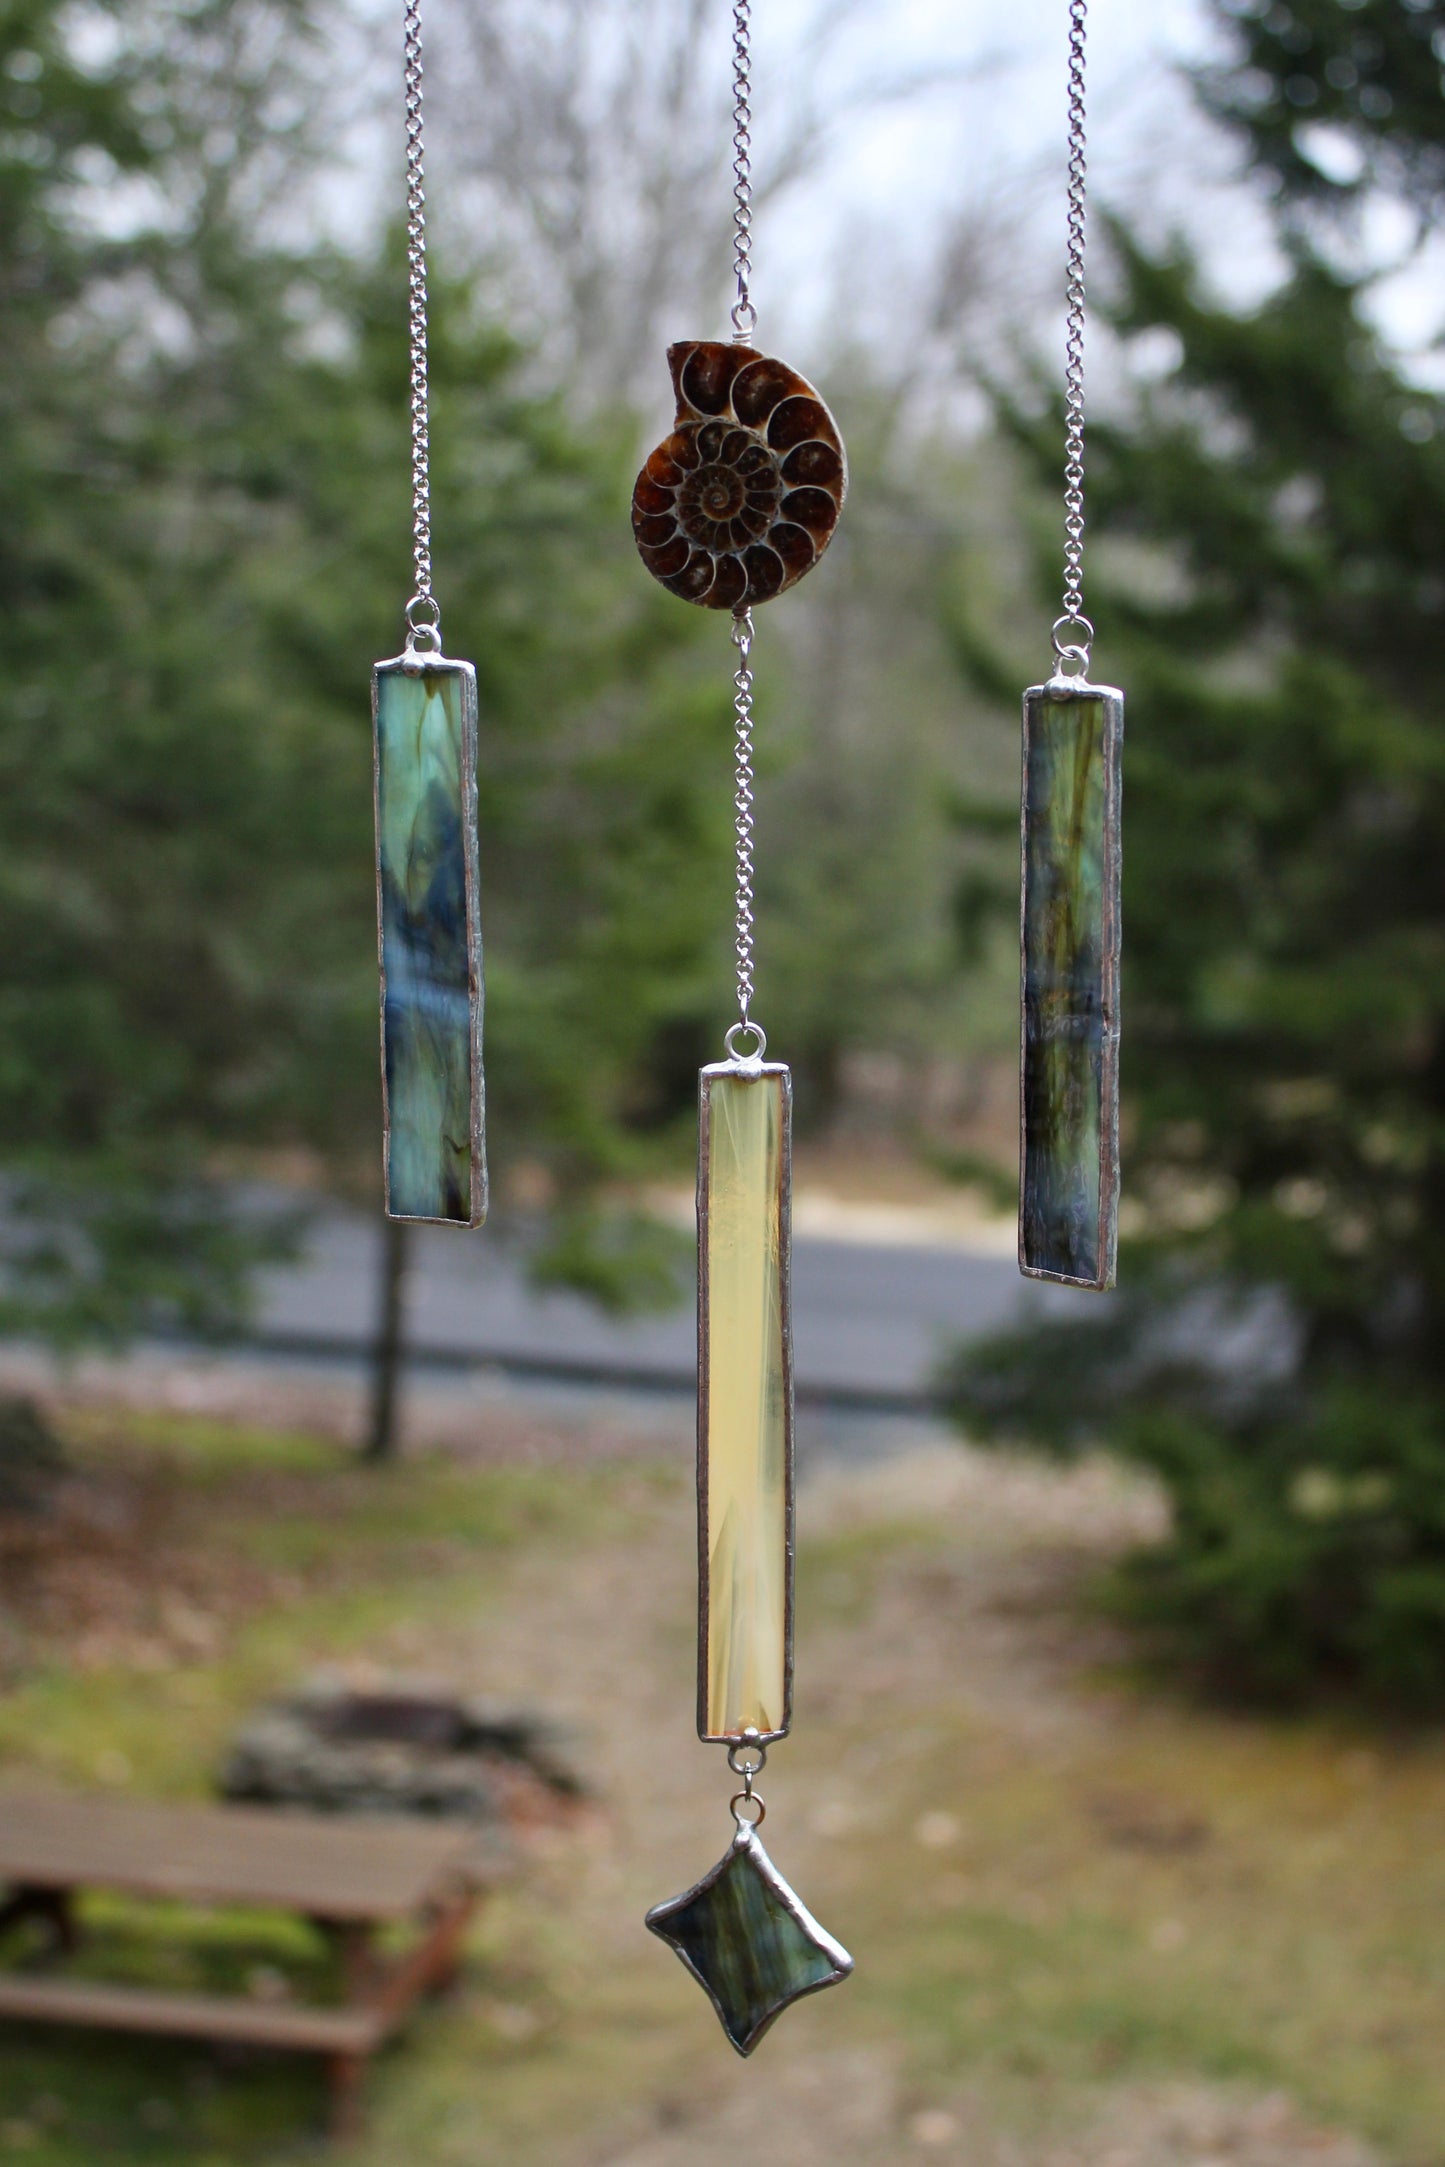 Drift Wood Stained Glass Mobile with Ammonite